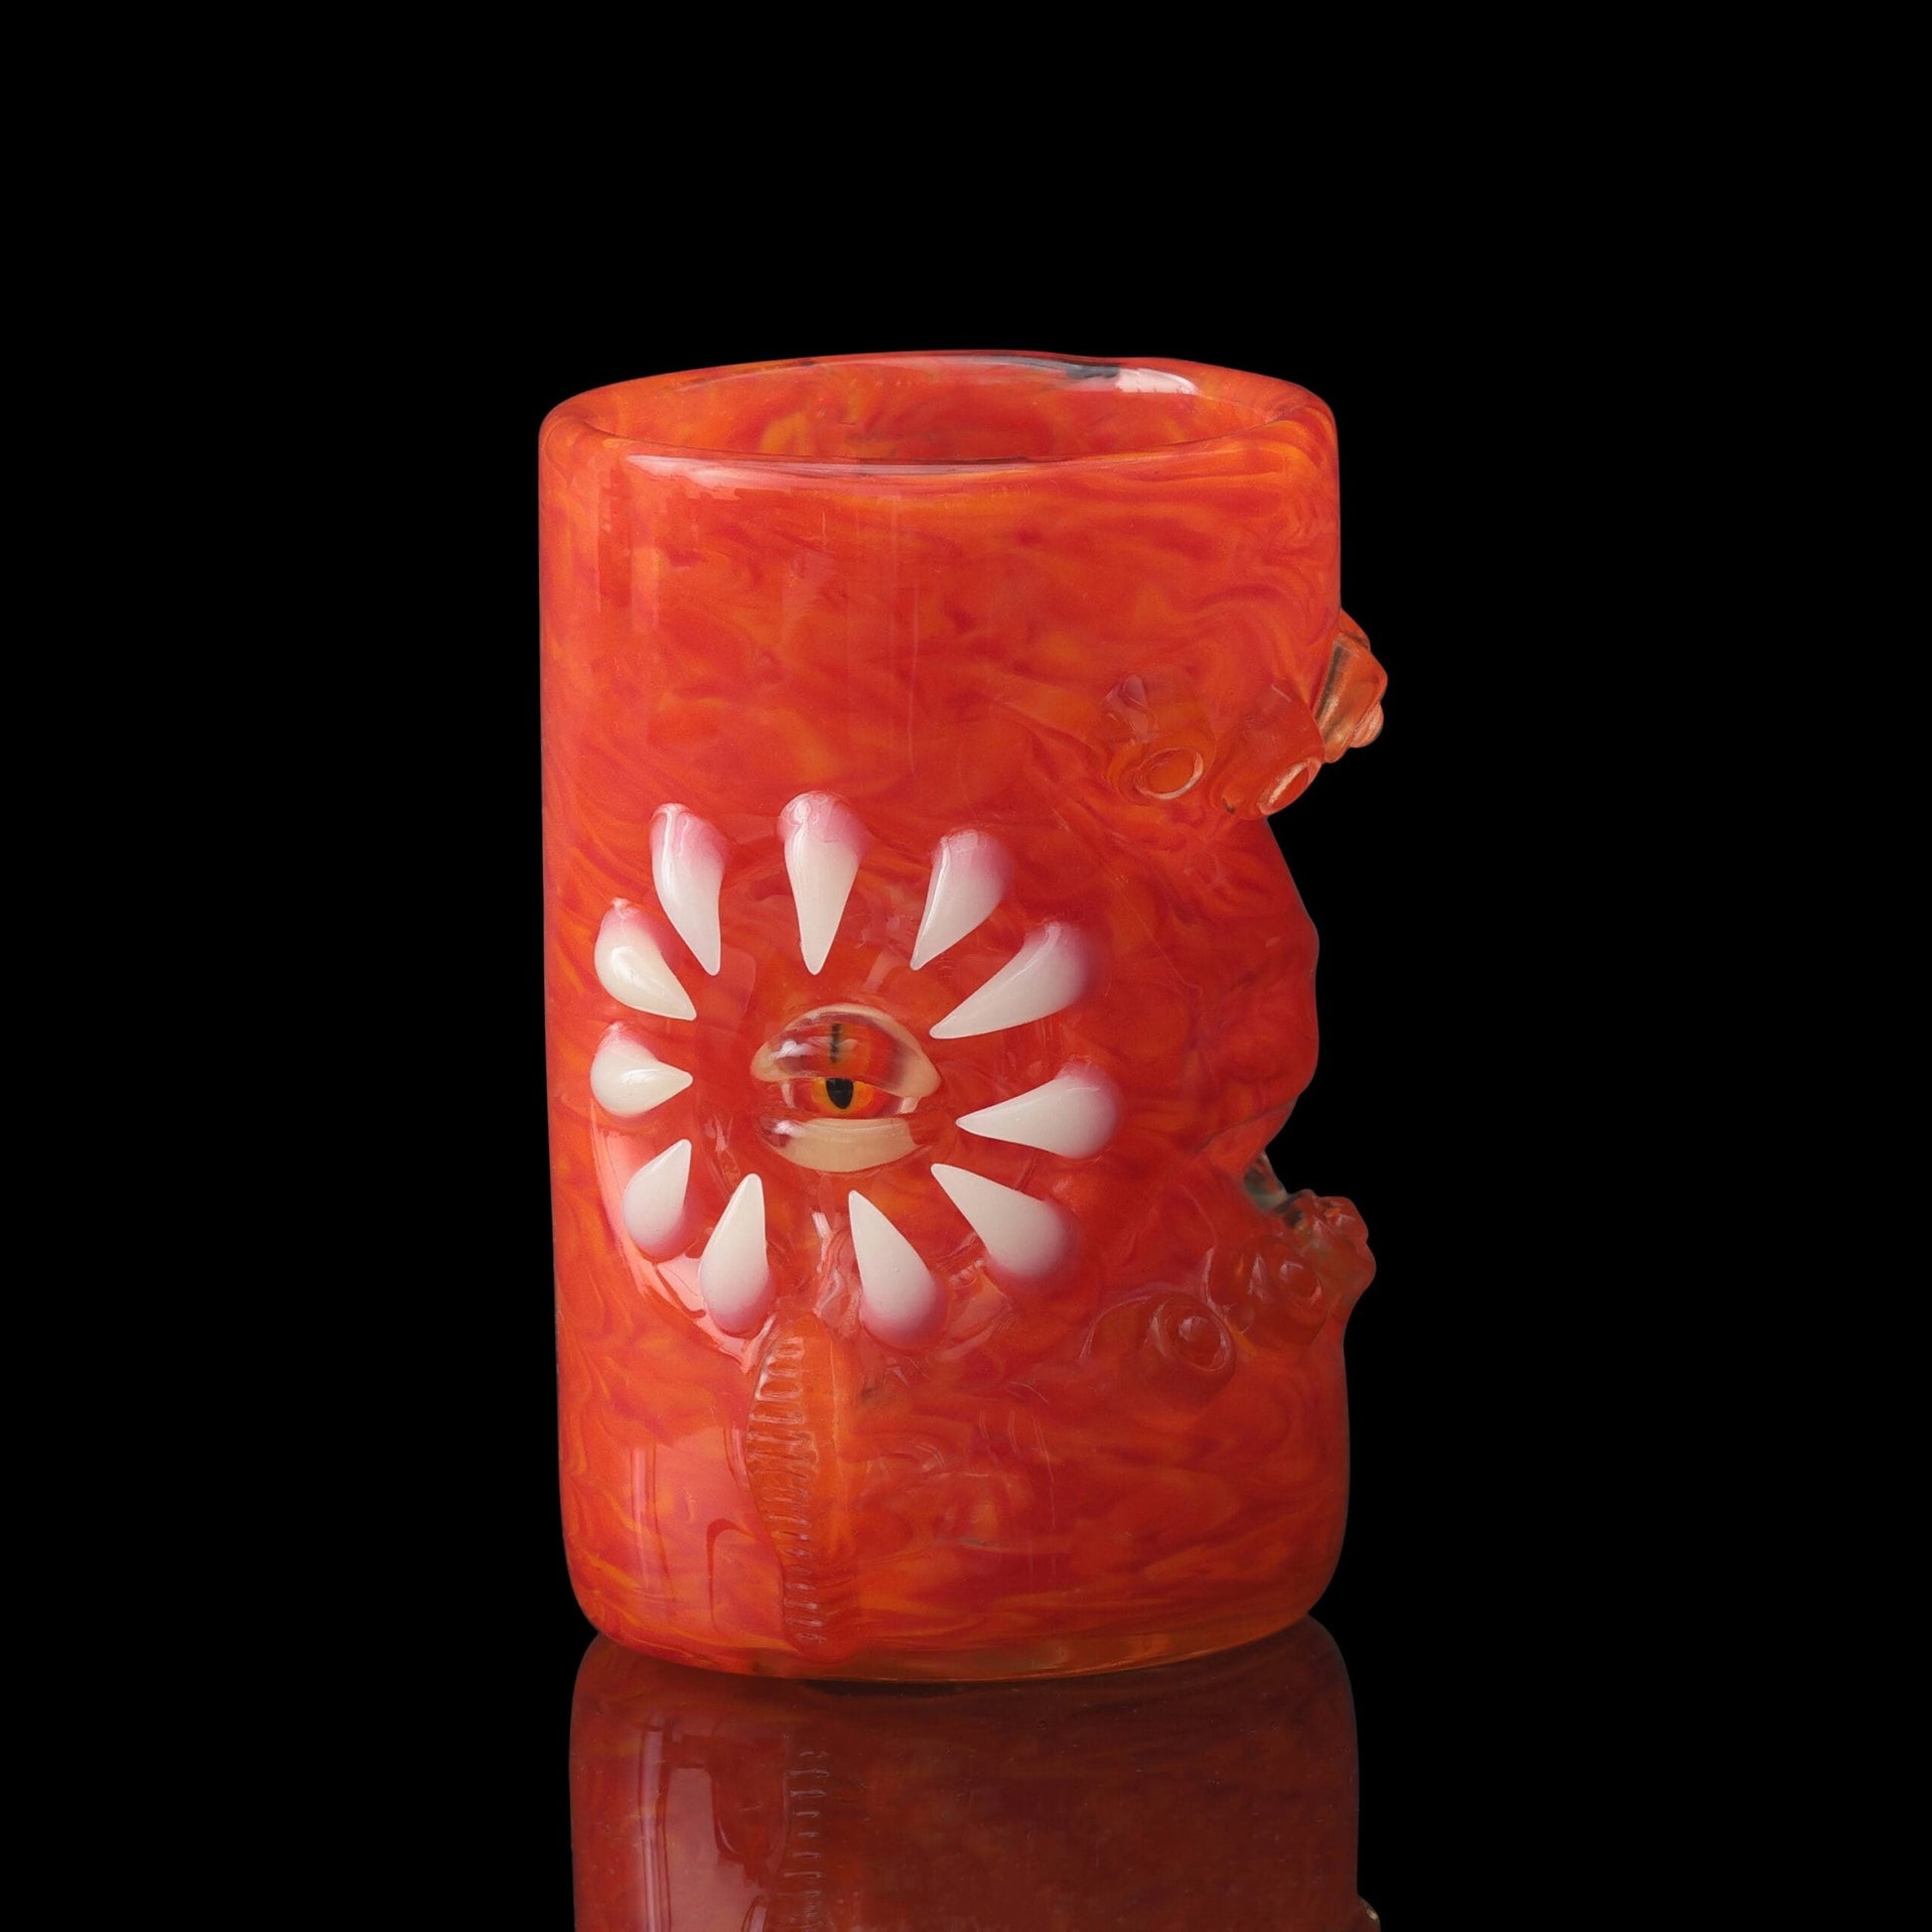 exquisite art piece - Fire Patterned Cup by Salt Glass (SCOPE 2022)